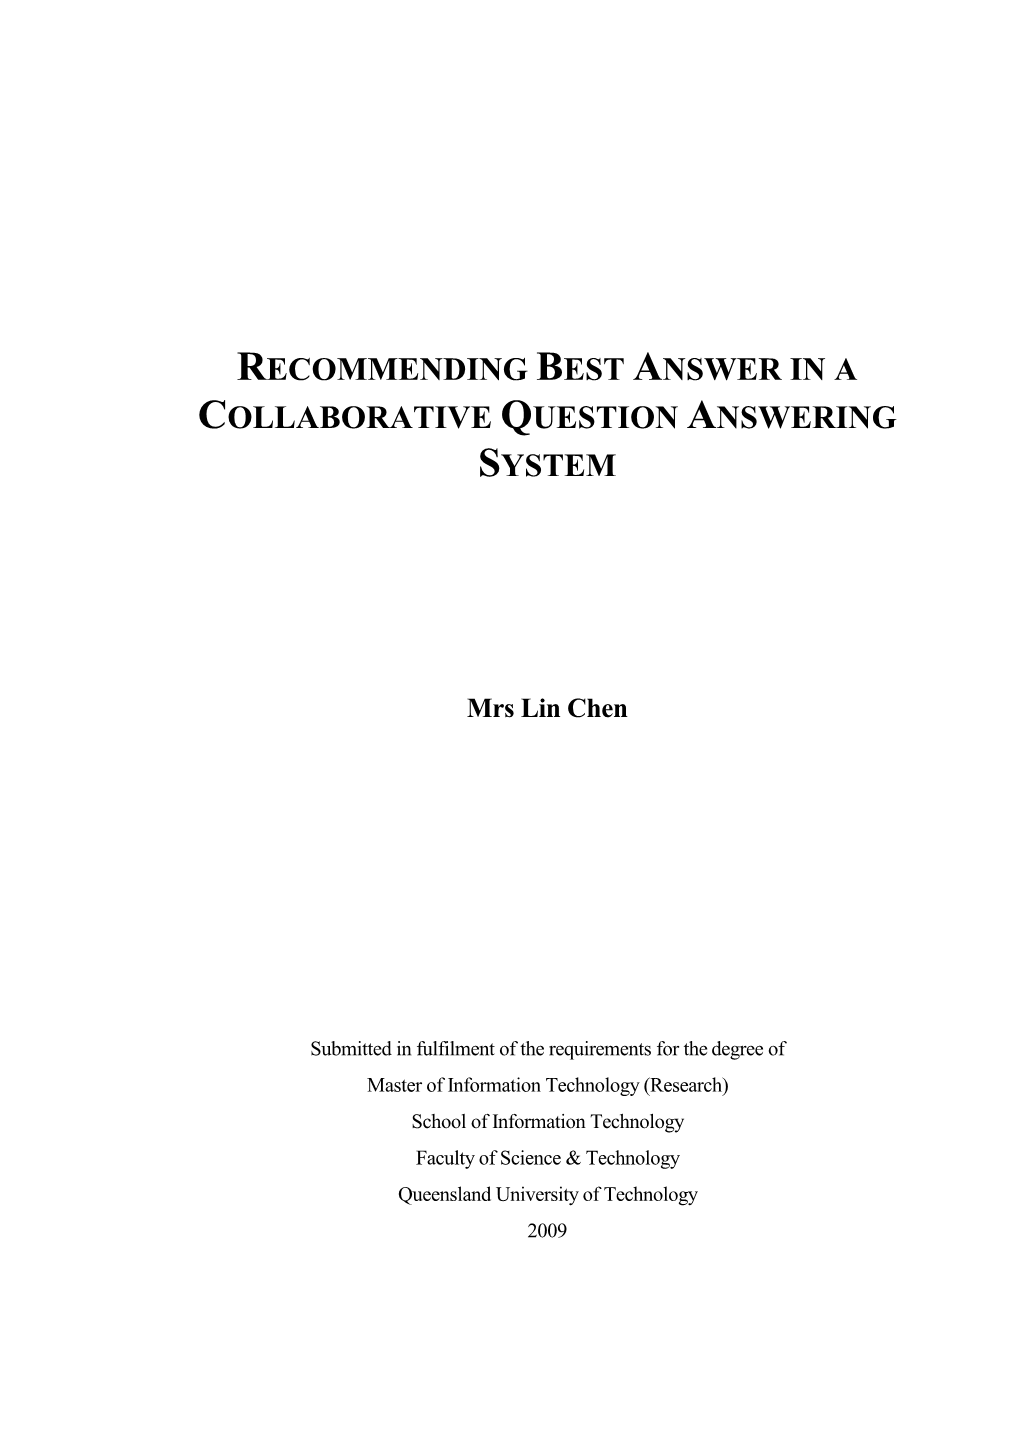 Recommending Best Answer in a Collaborative Question Answering System